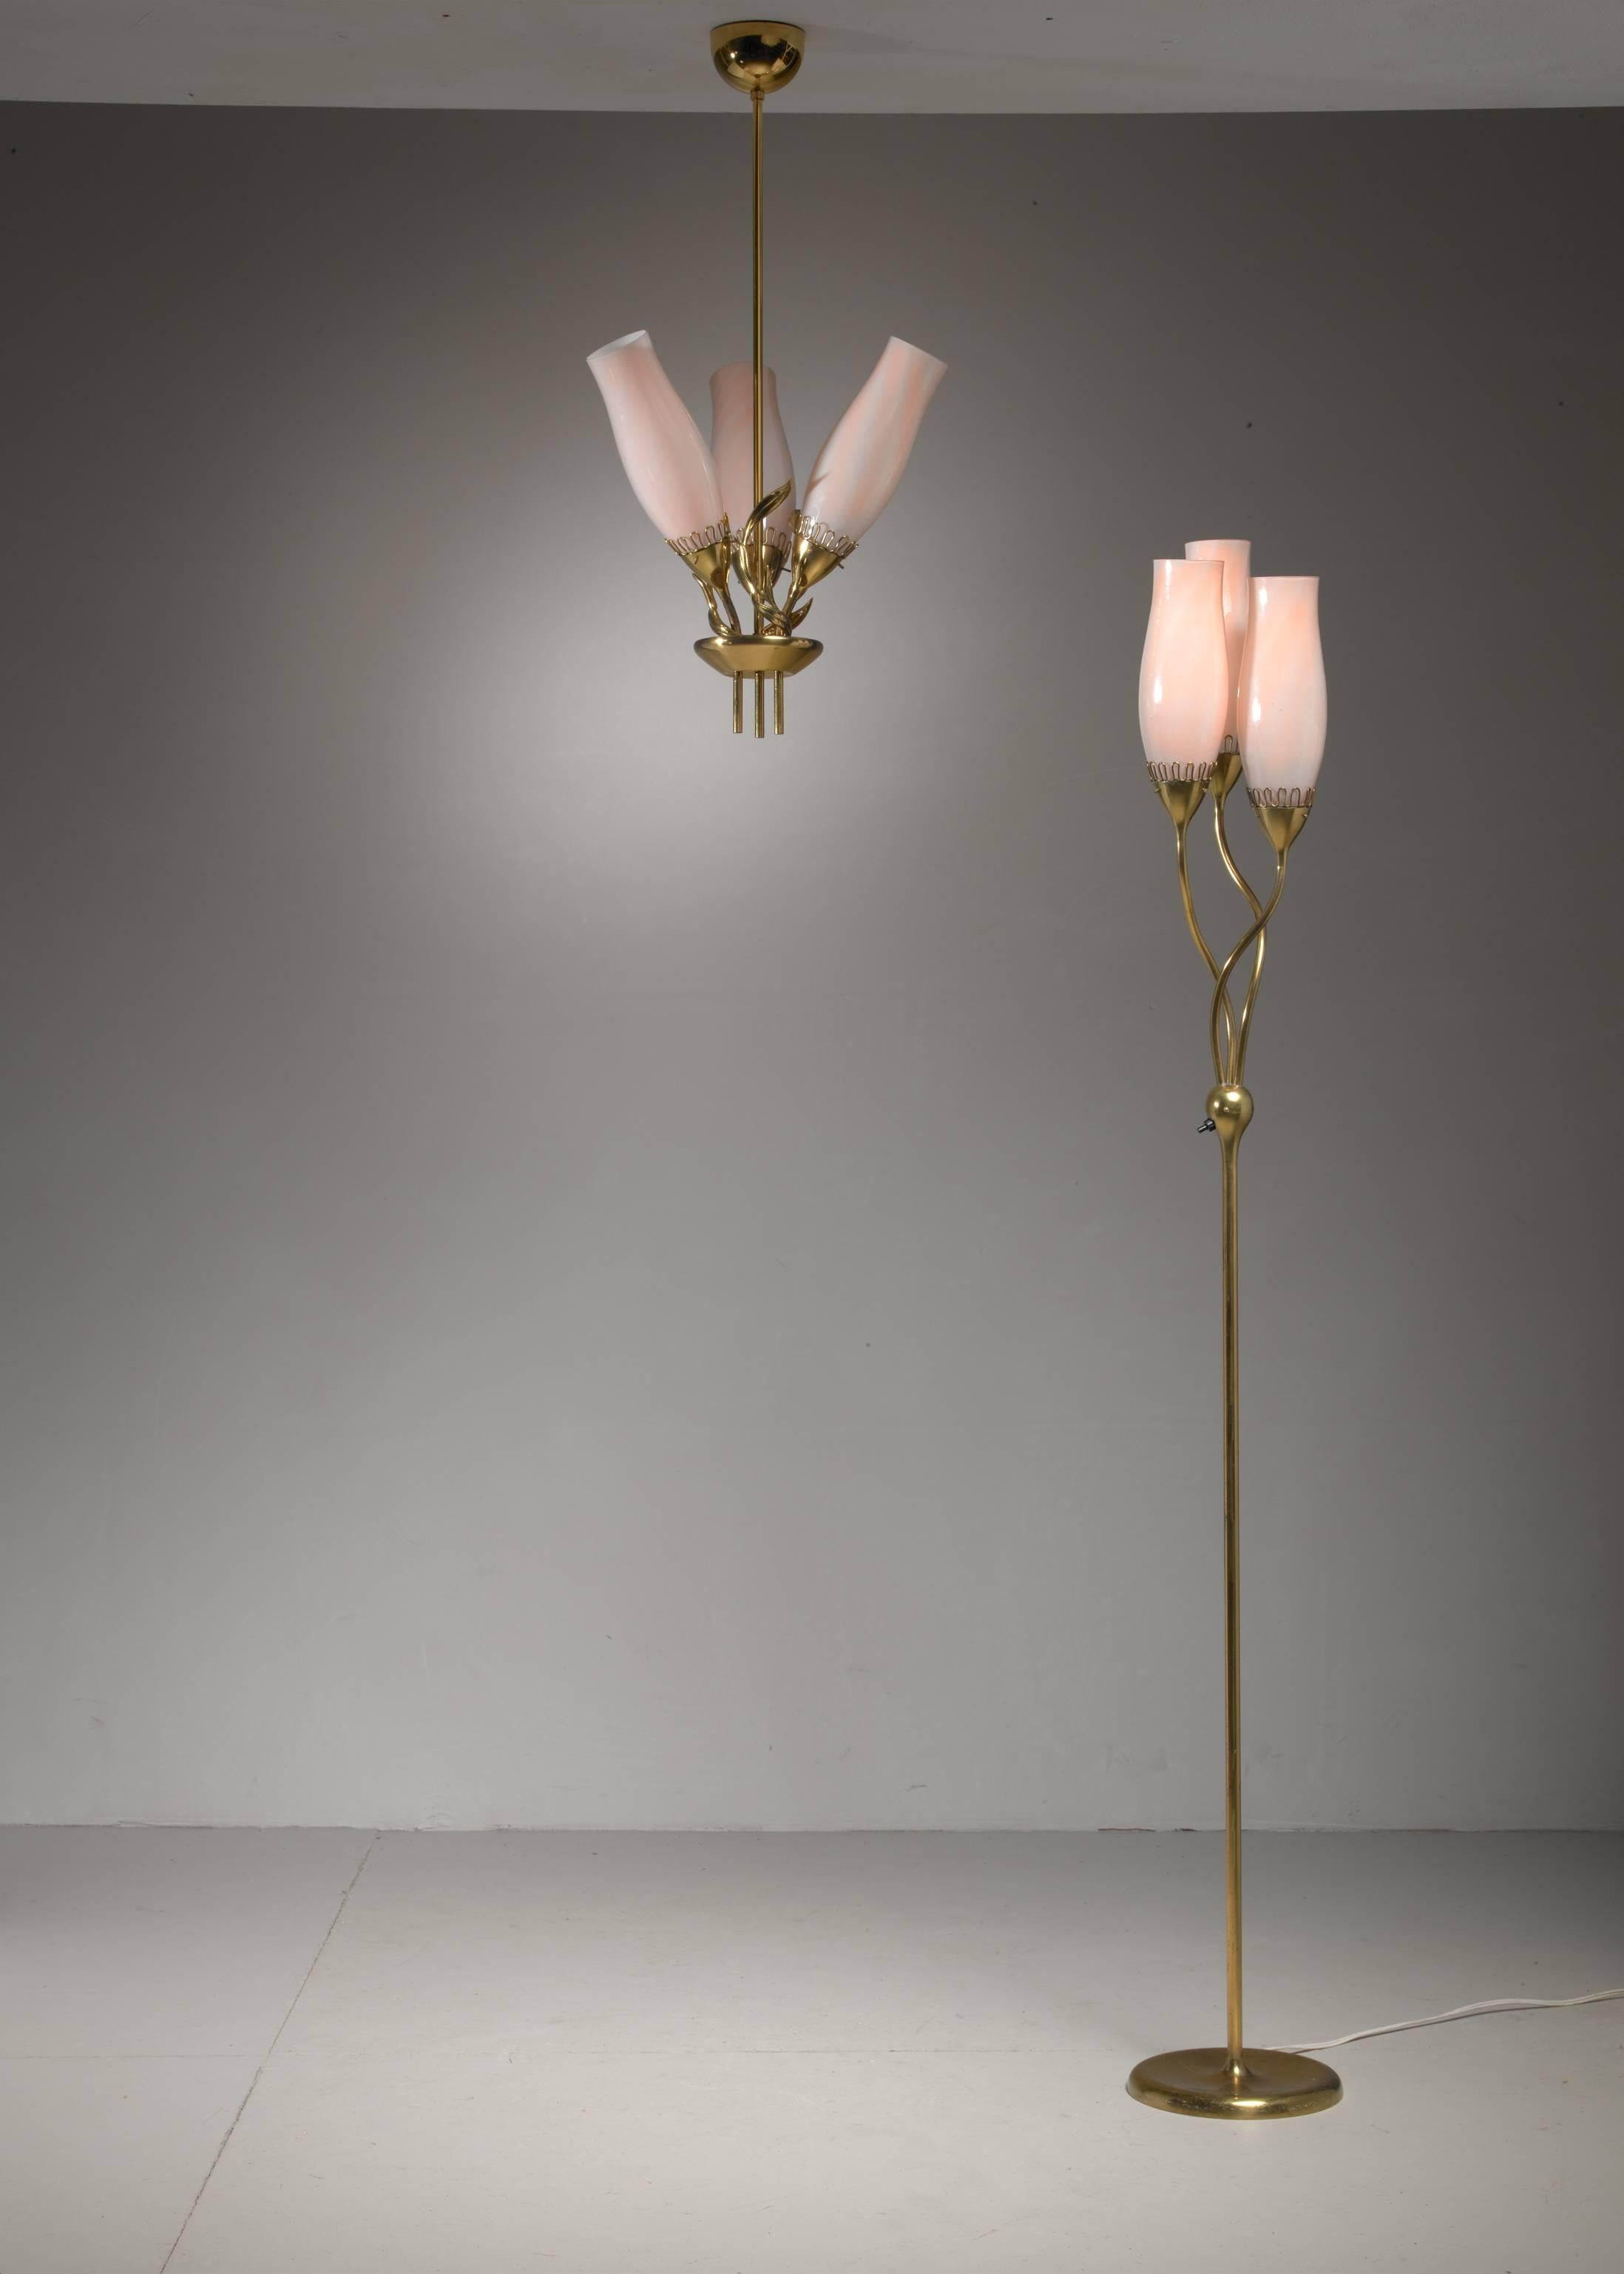 A rare model 51122 pendant and matching floor lamp by Paavo Tynell for Idman. Both lamps are made of brass with three glass shades in soft pink. The glass has two layers, white inside and pink outside.
The shades are held by a brass crown shaped